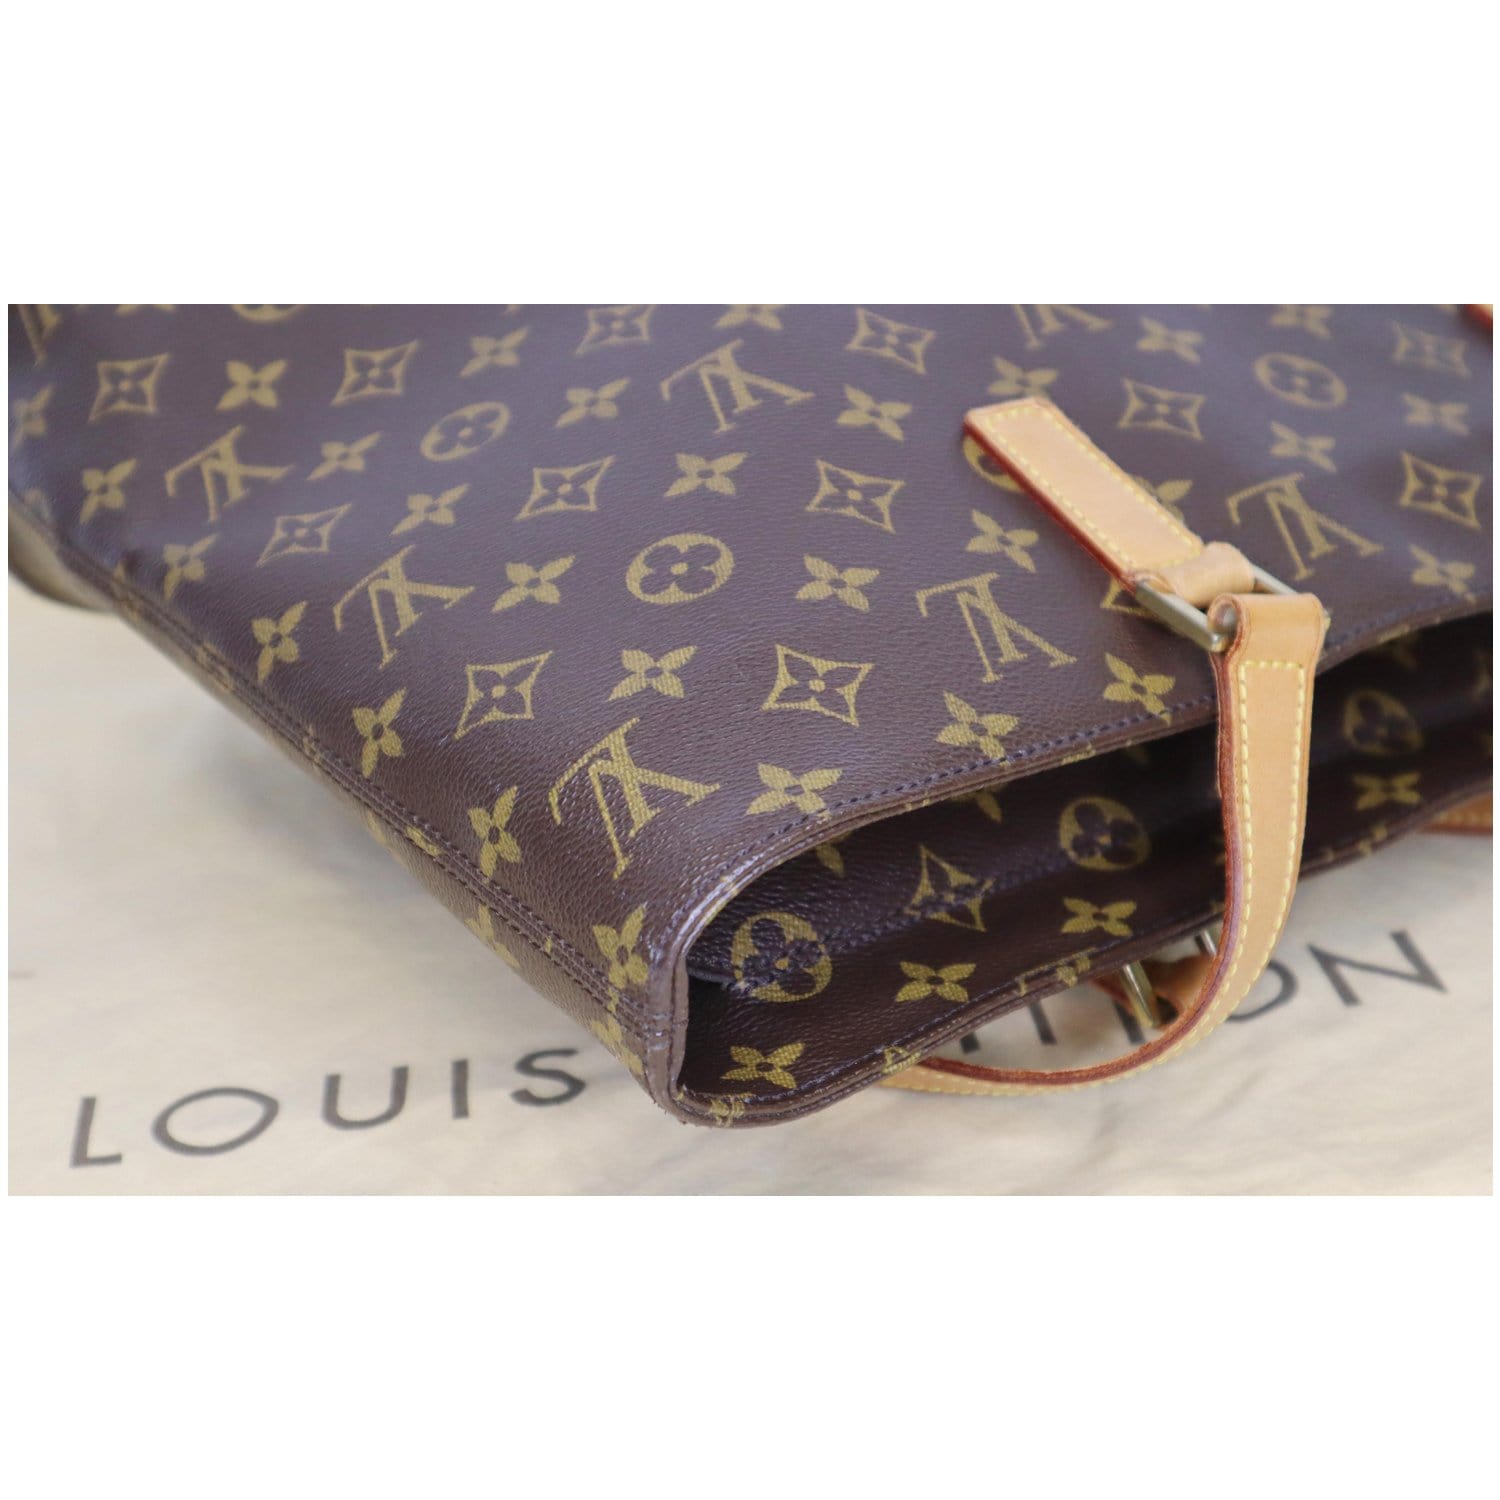 Designer Exchange Ltd - This Louis Vuitton Luco Tote will definitely get  you through any occasion in 2021 👜 Live to browse on  www.designerexchange.ie/products/monogram-luco?_pos=1&_sid=88da865f6&_ss=r  🛍️